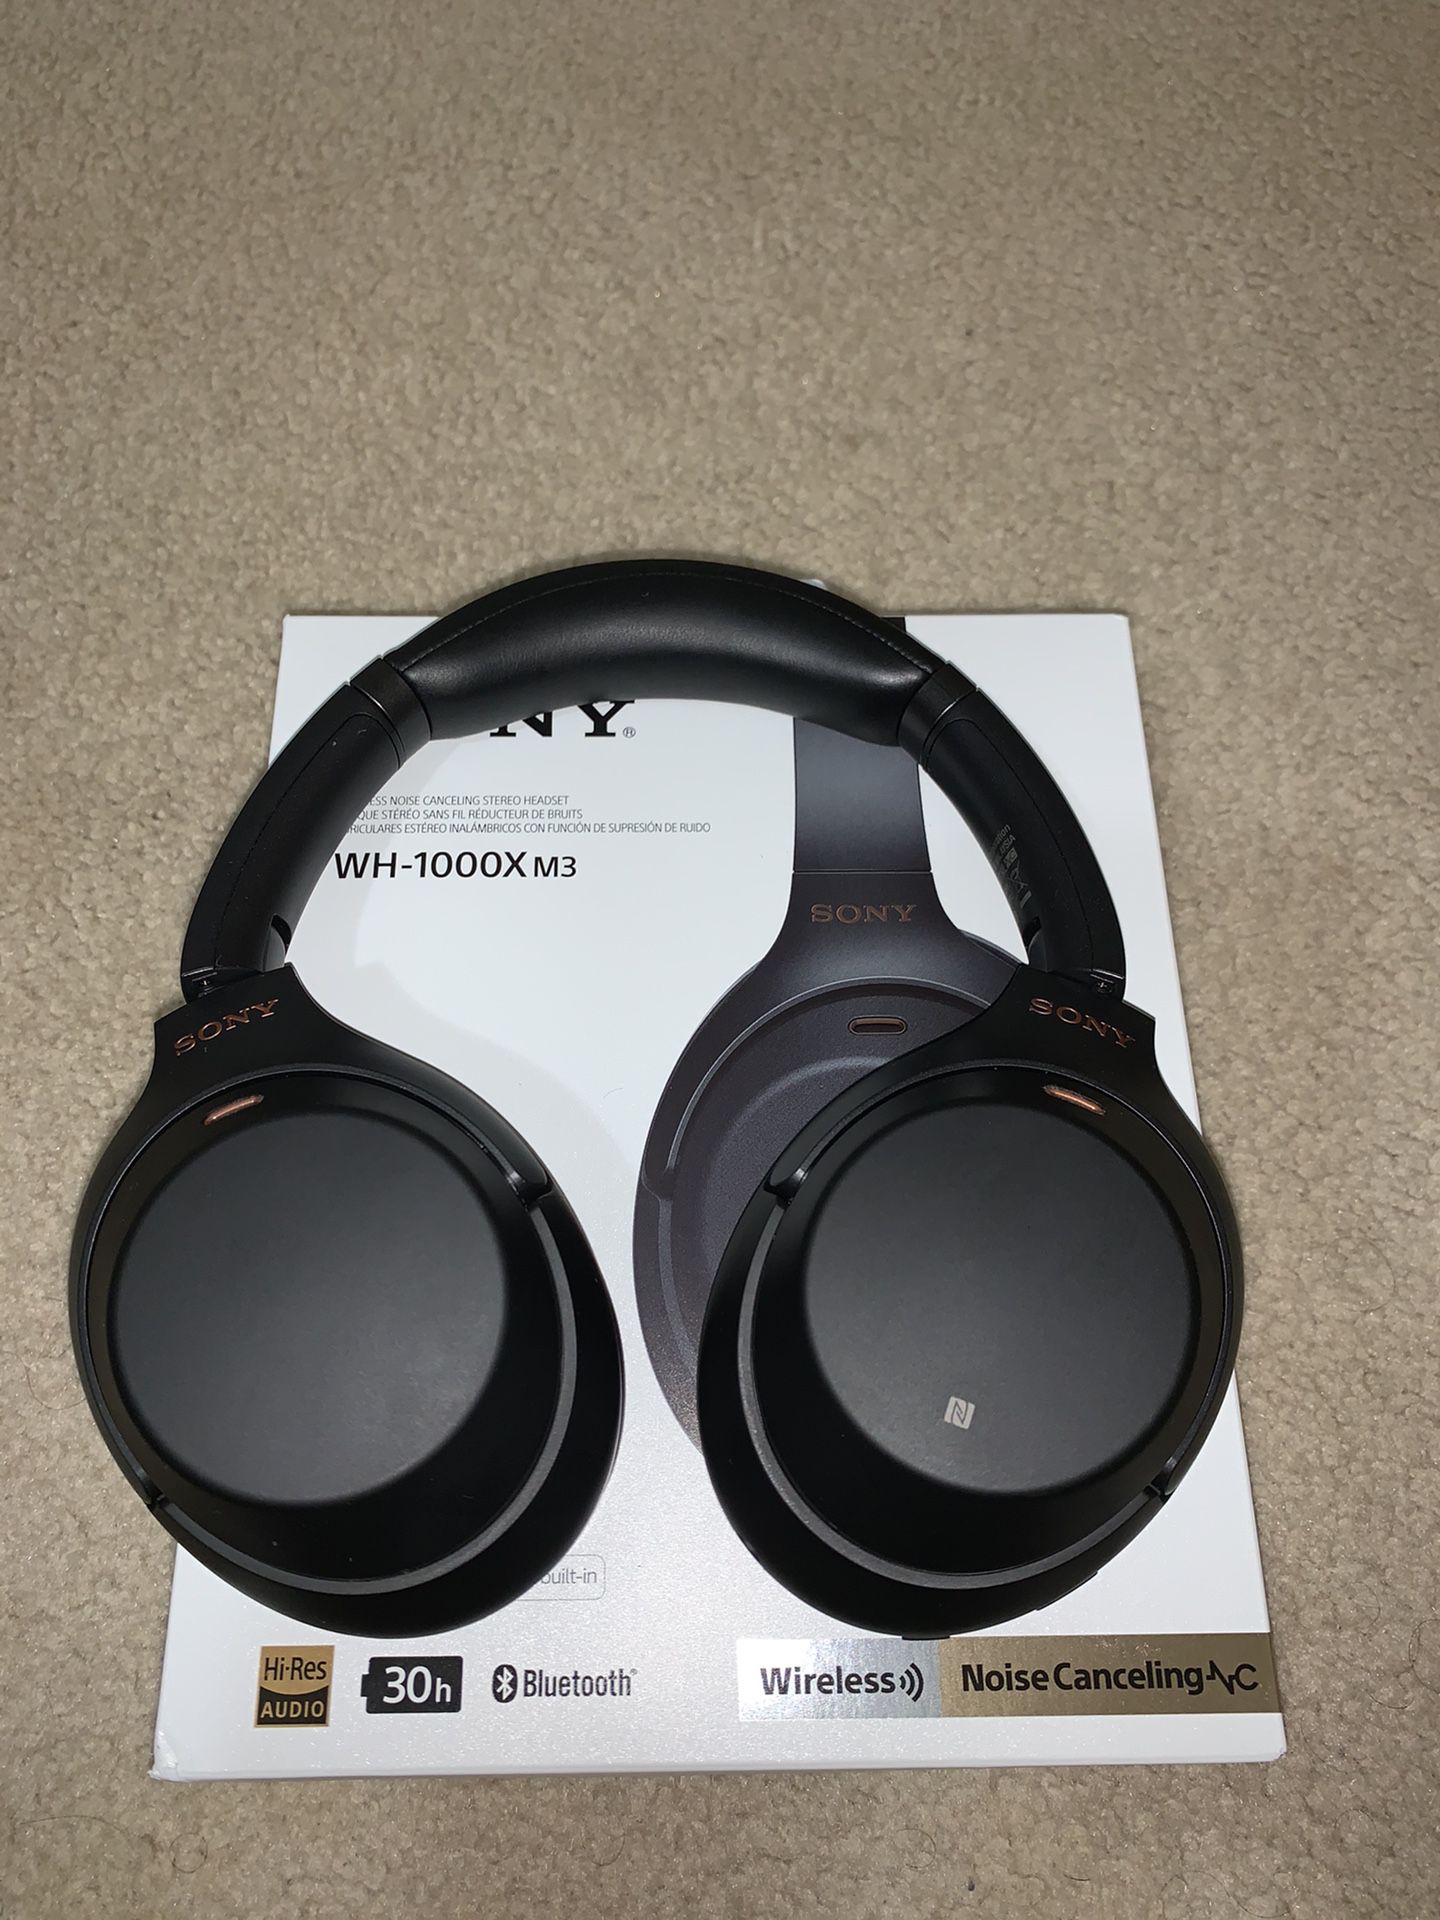 Sony WH-1000X M3 Noise Canceling Headset